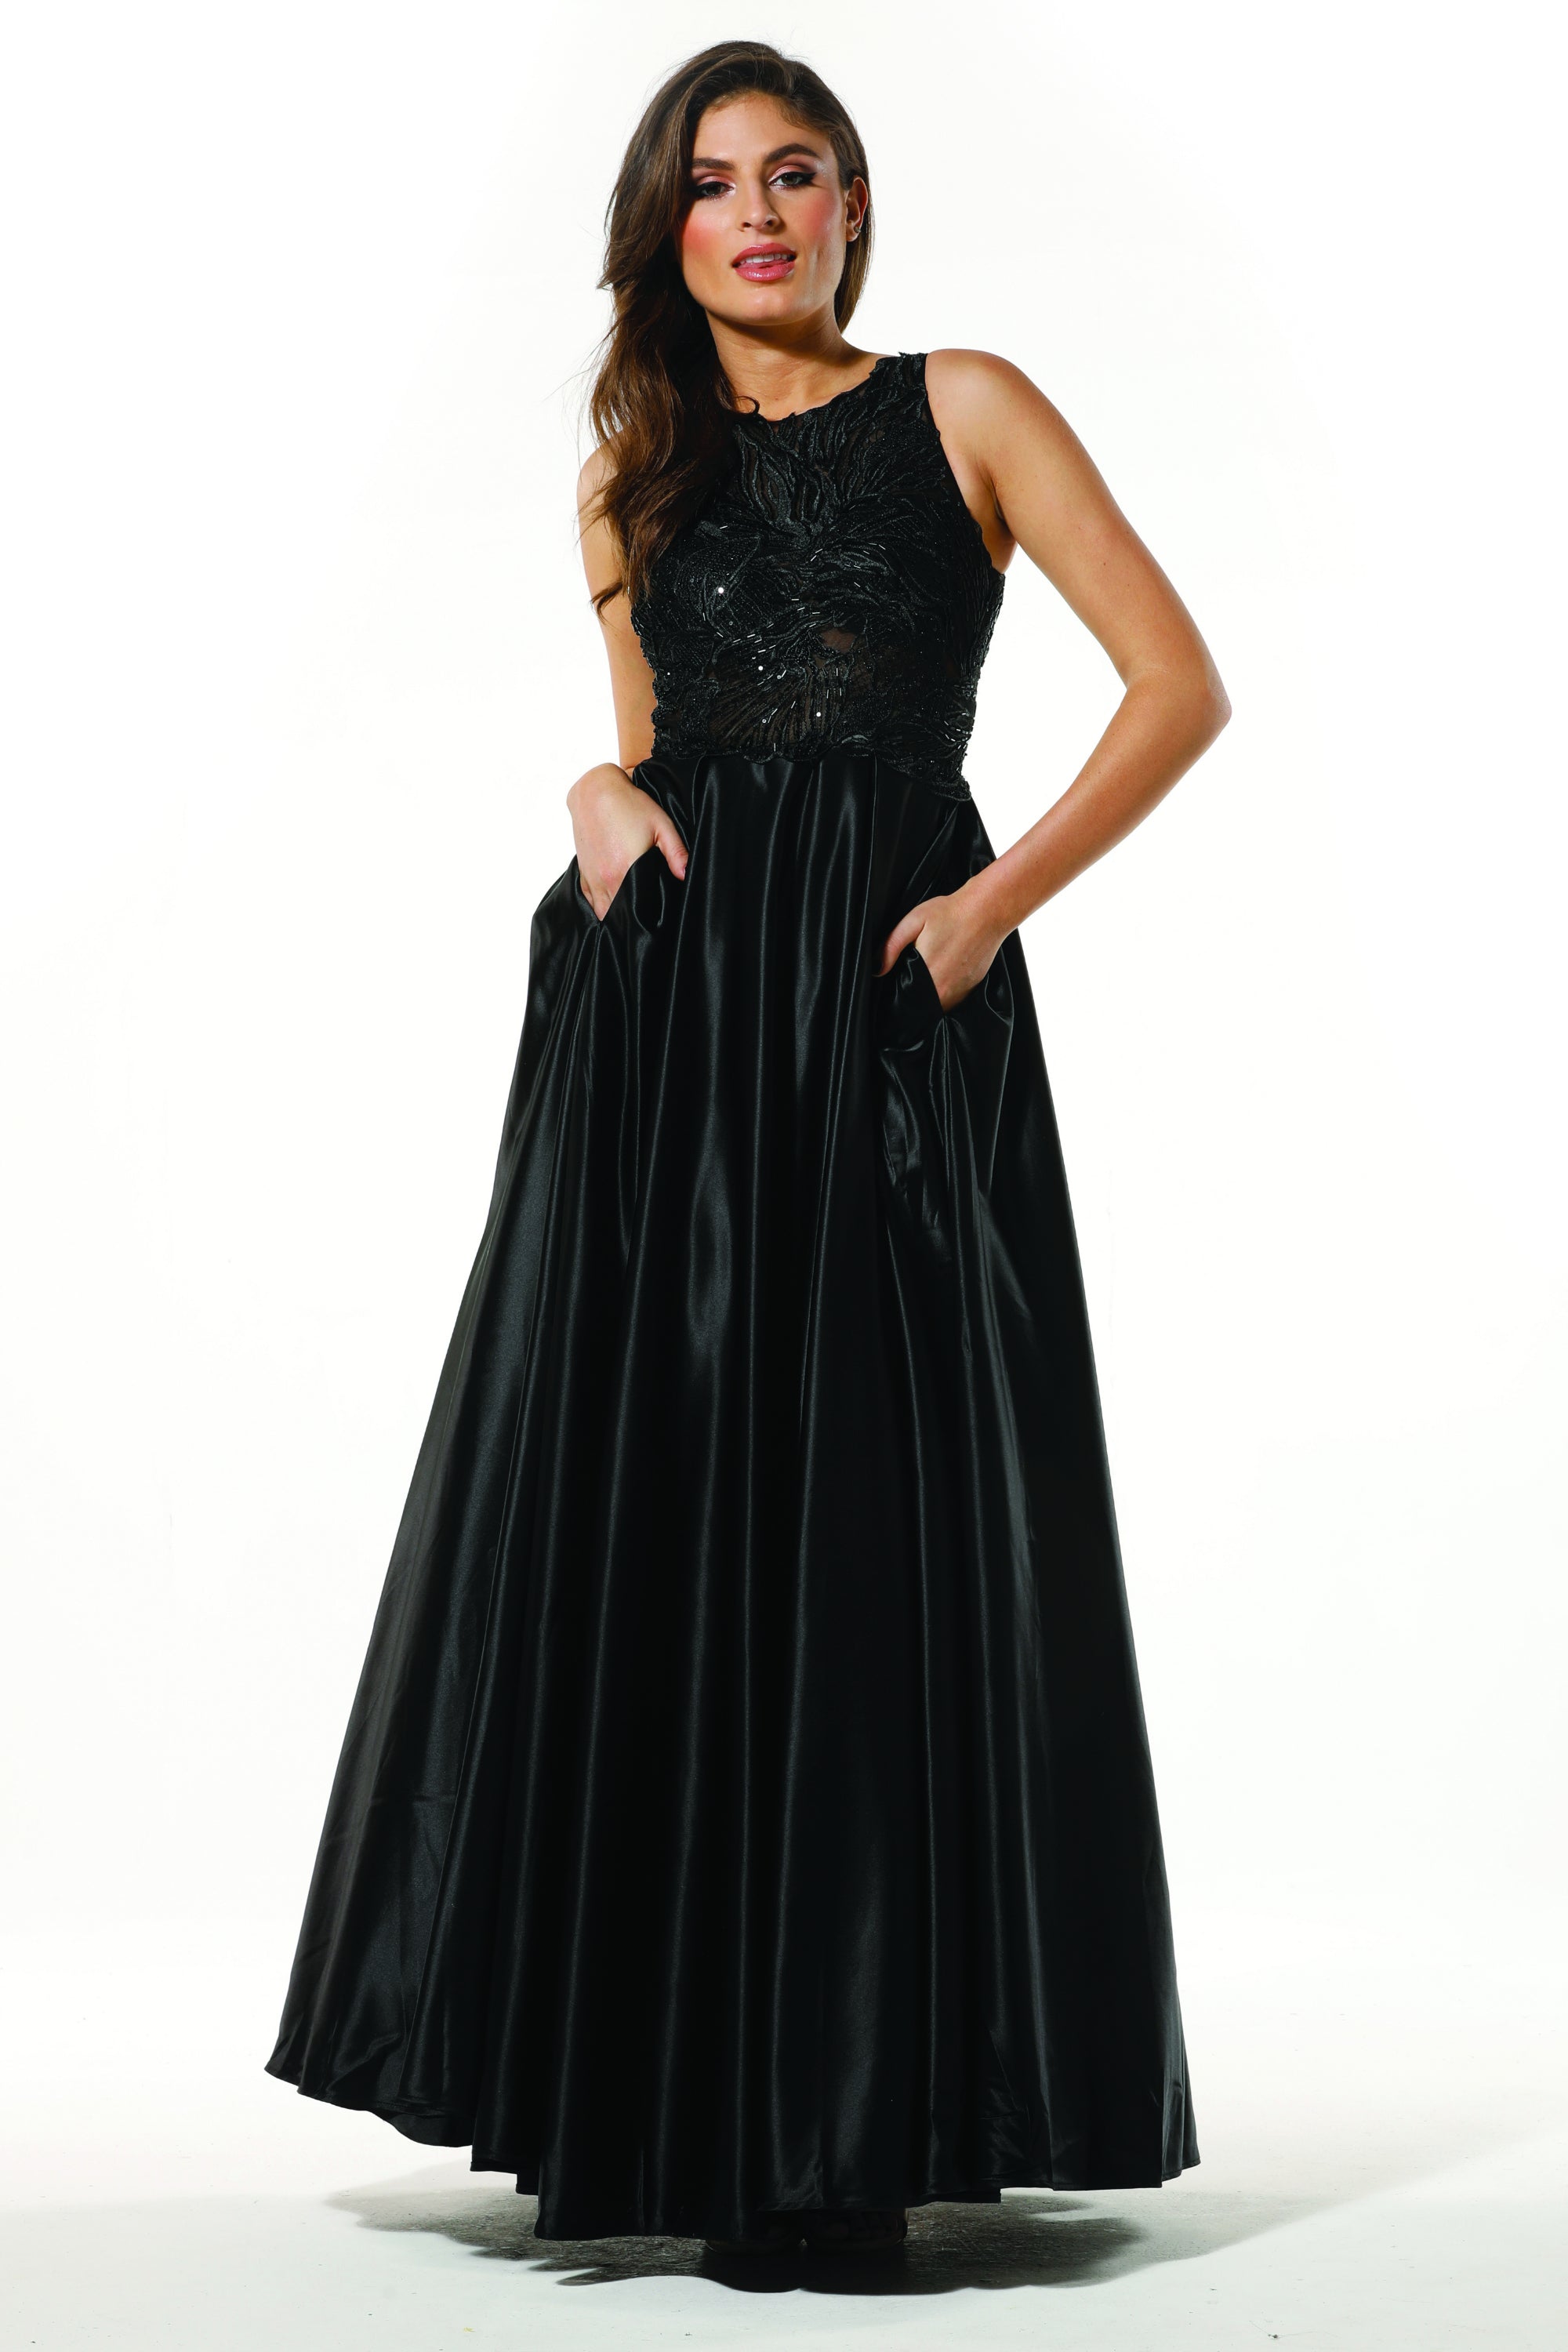 Tinaholy Couture Designer T19435 Black Satin Formal Prom Ball Gown Dress Tina Holly Couture$ AfterPay Humm ZipPay LayBuy Sezzle